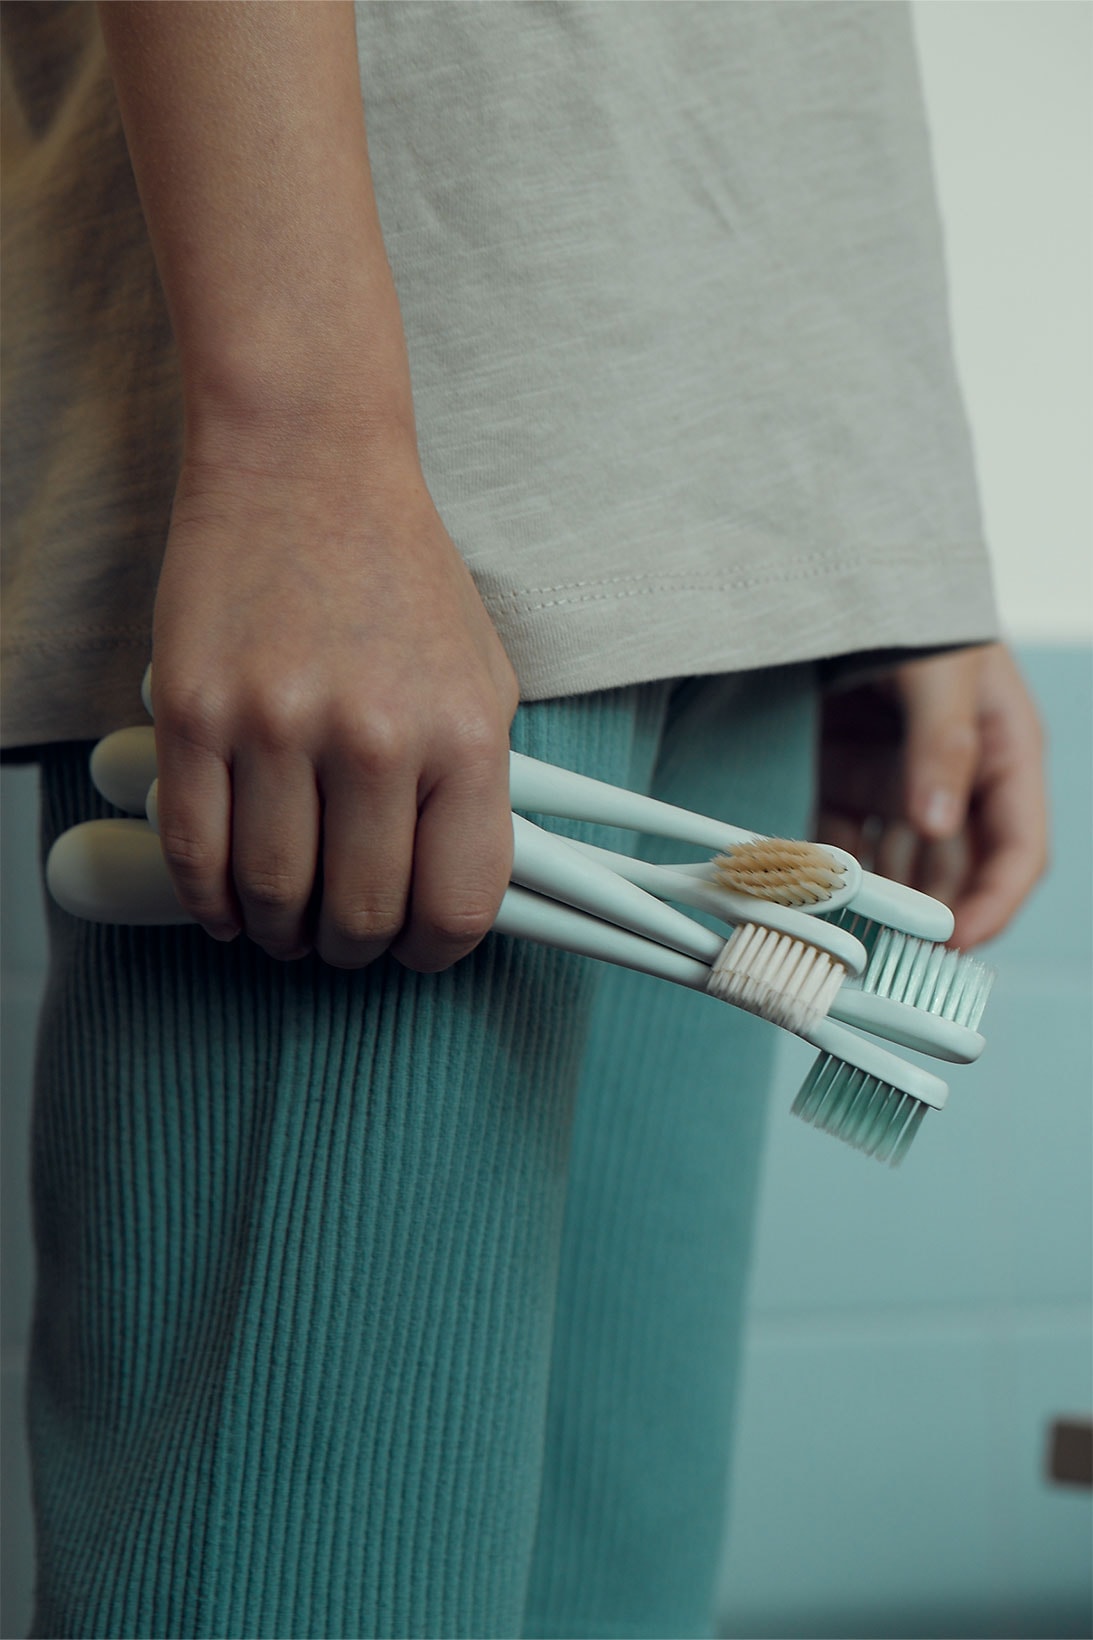 HAYAN Toothbrushes Biodegradable Sustainable Design Launch Price 